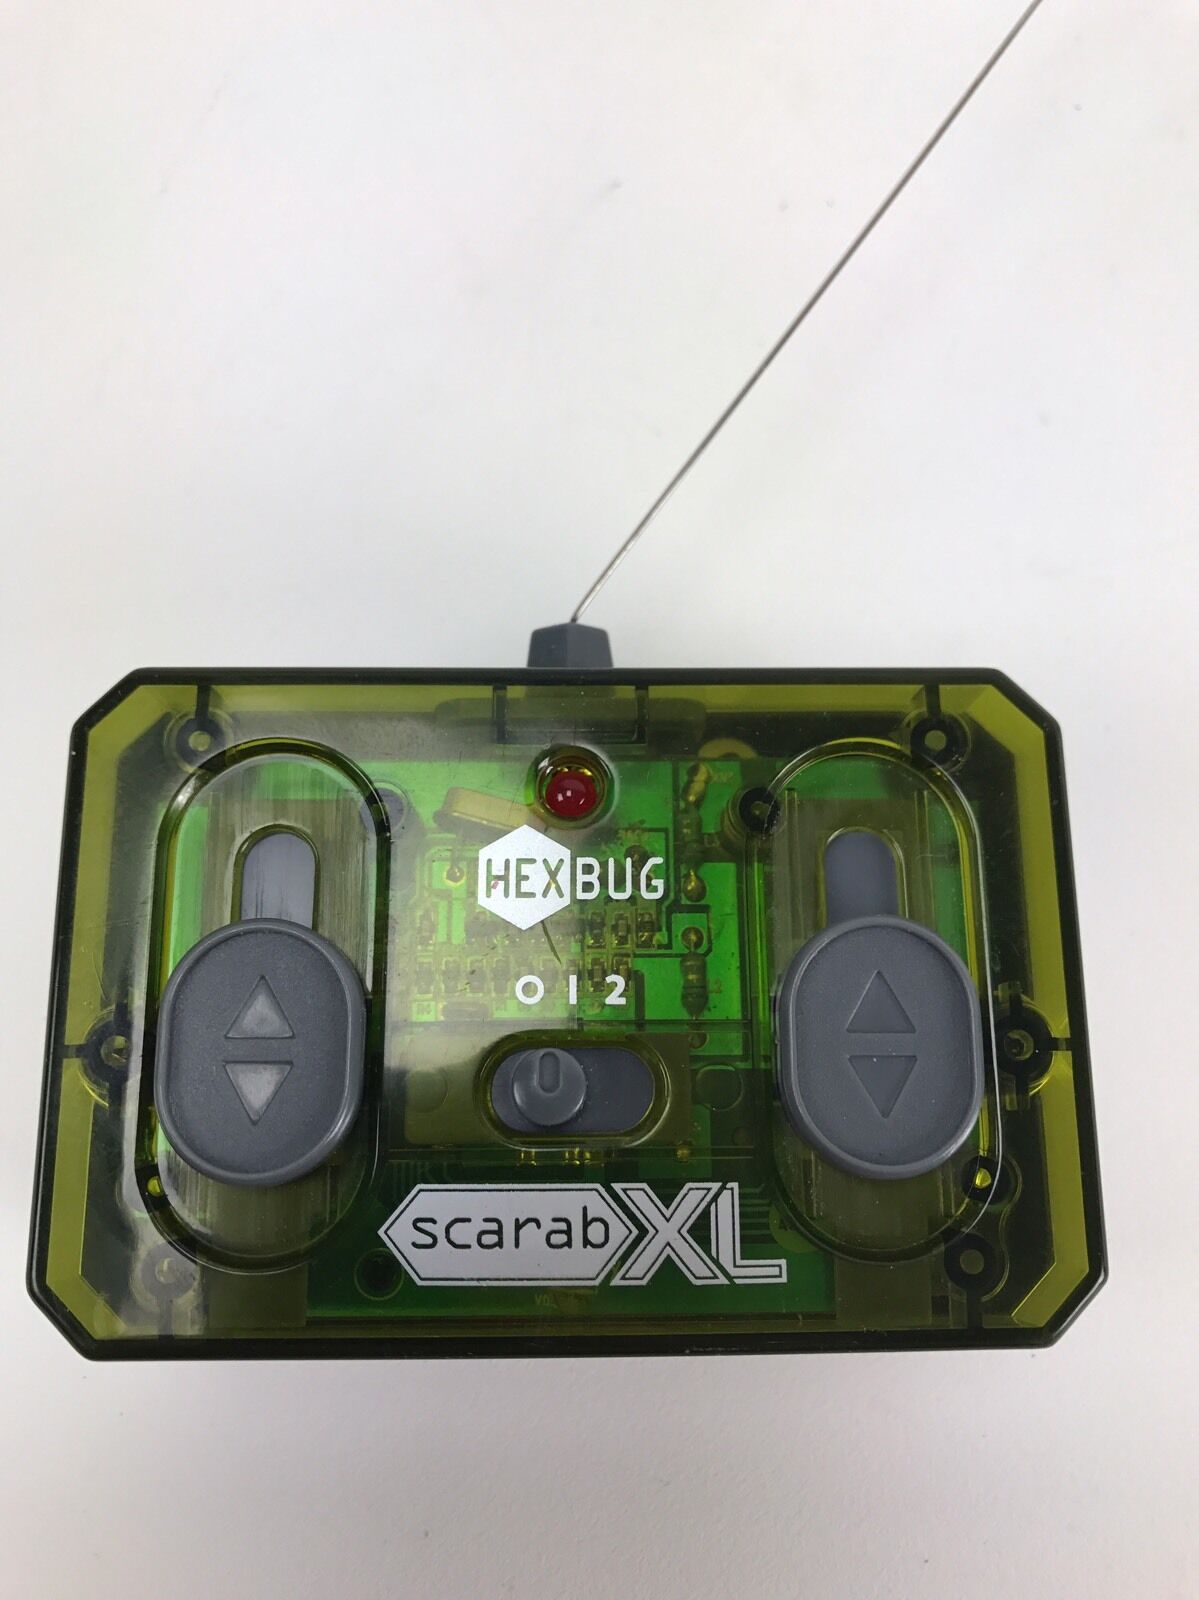 Hexbug Scarab Remote Control Rc Controller Fast Free Shipping